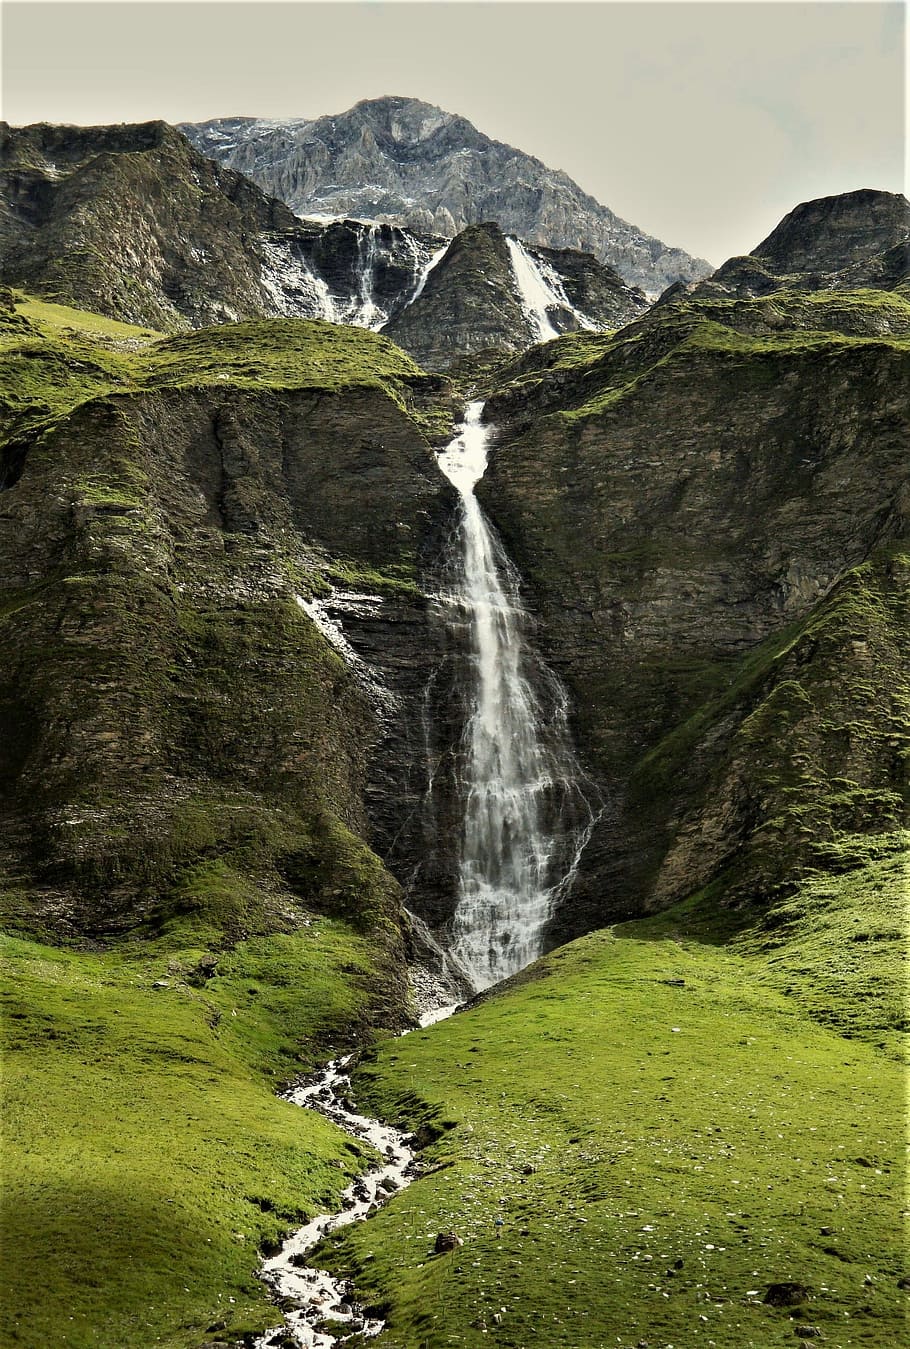 waterfalls during daytime, waterfall, glacial lake, mountains, switzerland, landscape, beauty in nature, scenics - nature, plant, mountain